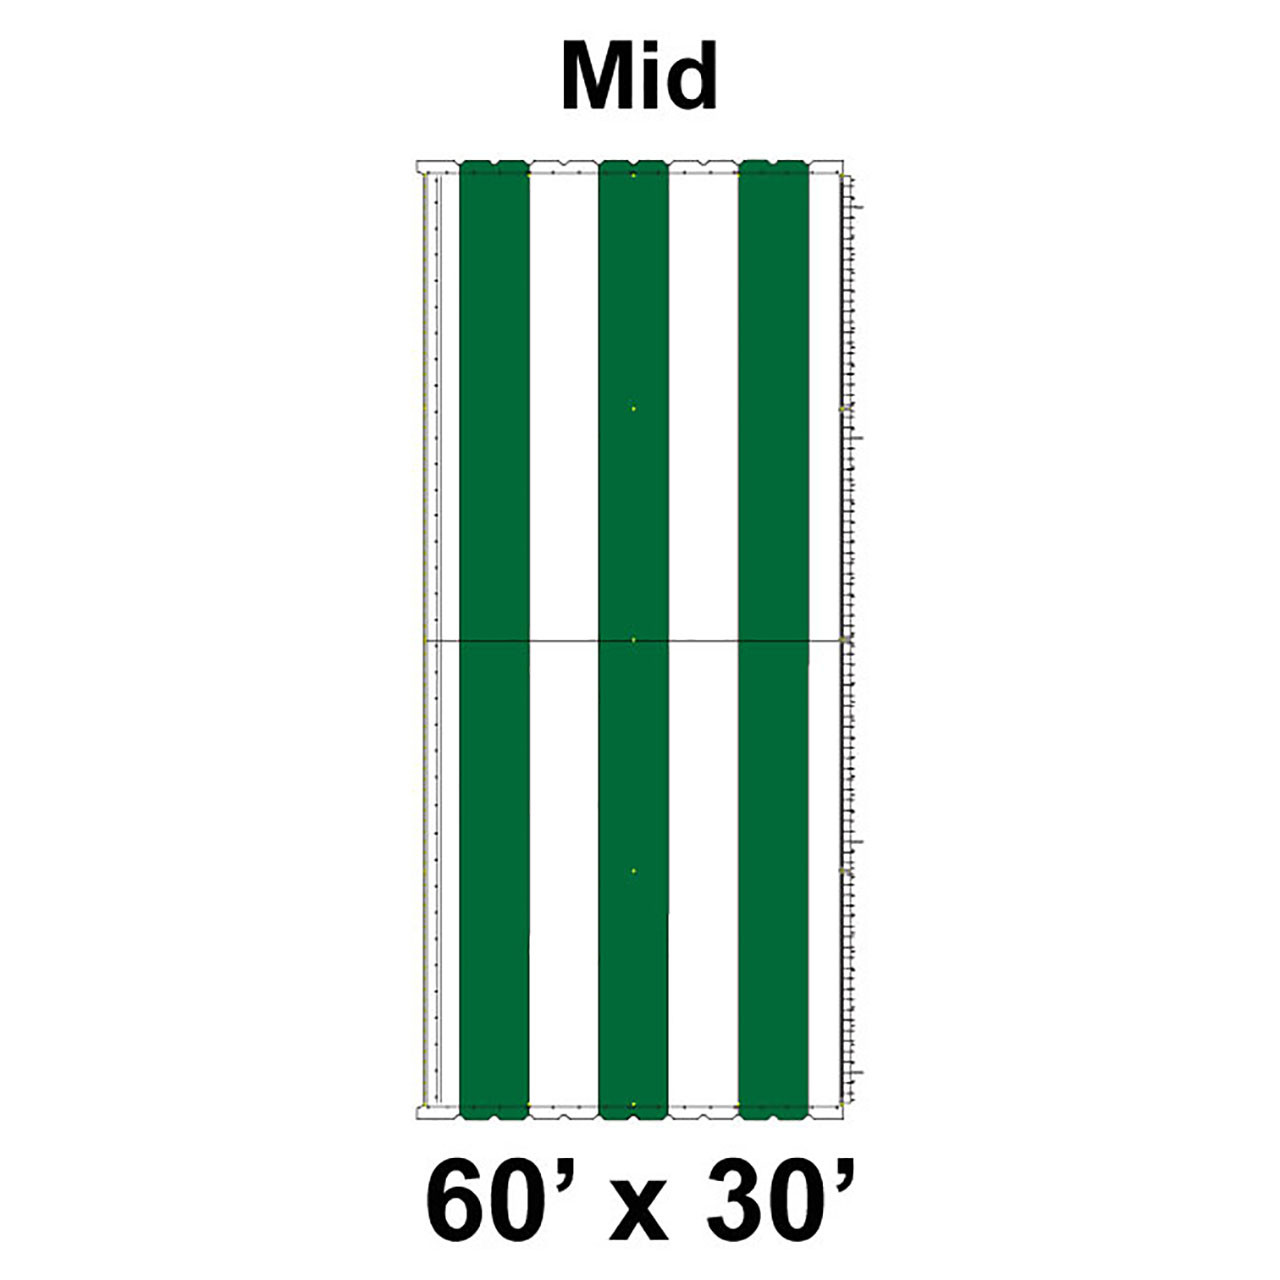 60' x 30' Classic Pole Tent Top, Mid Section